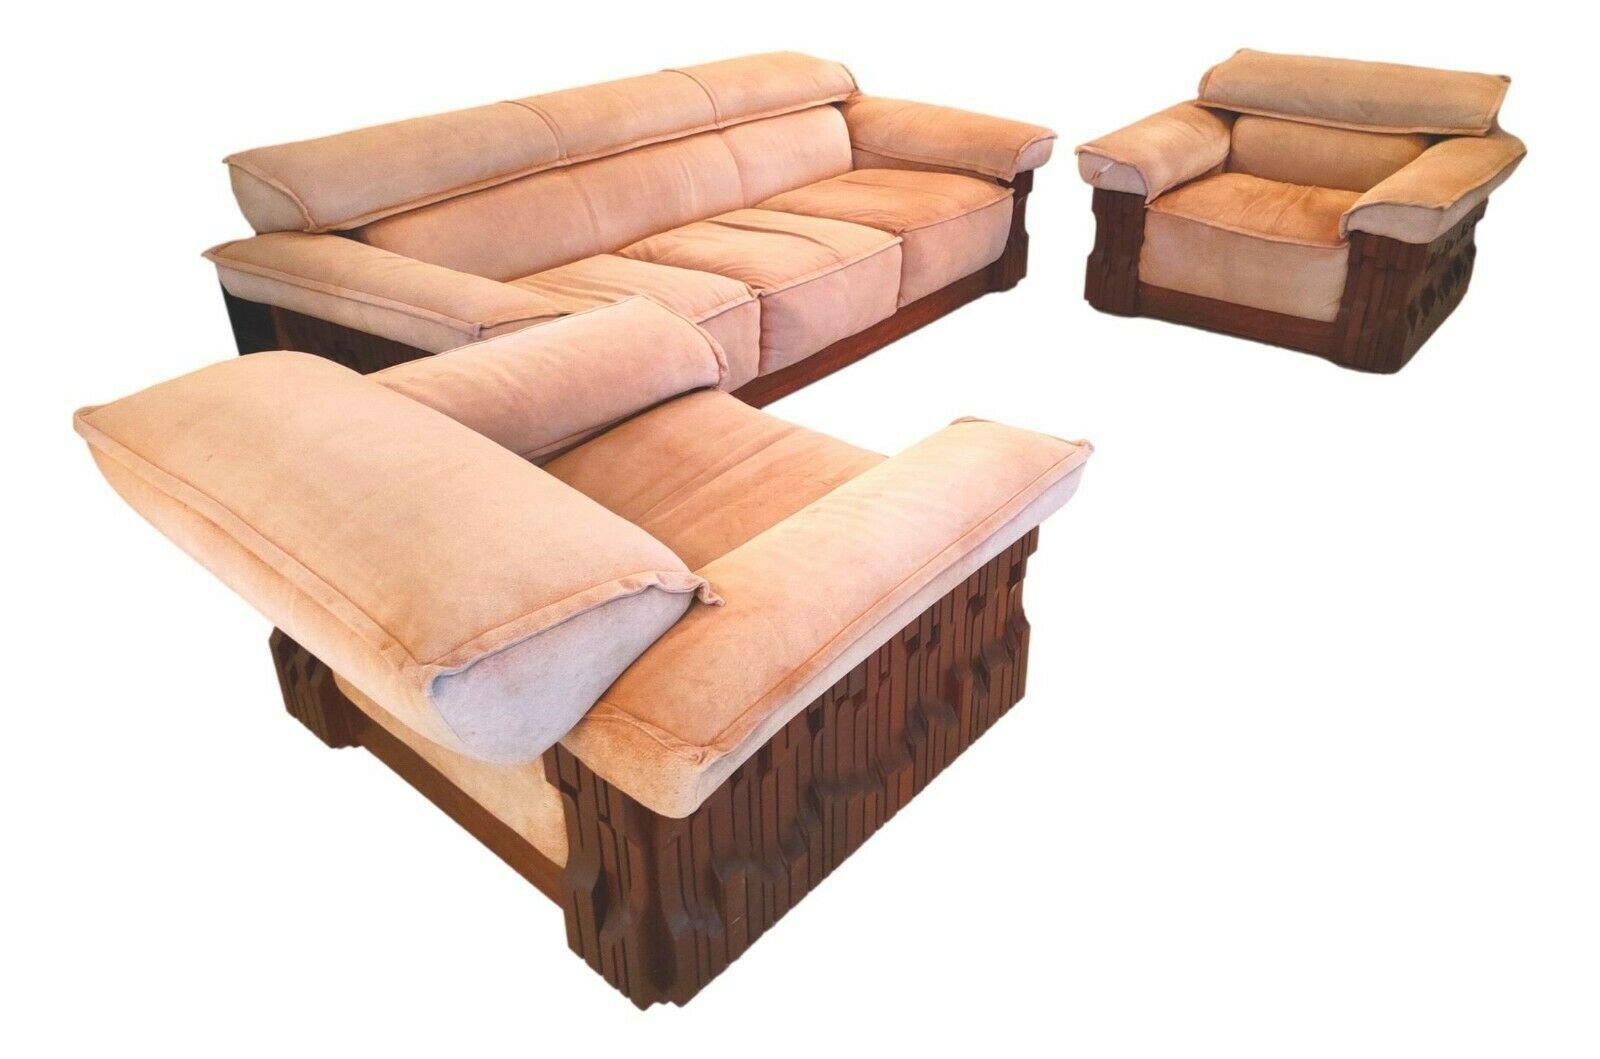 model norman piano sofa and armchairs by luciano frigerio di desio 1968 set of 3 FIP-1003406